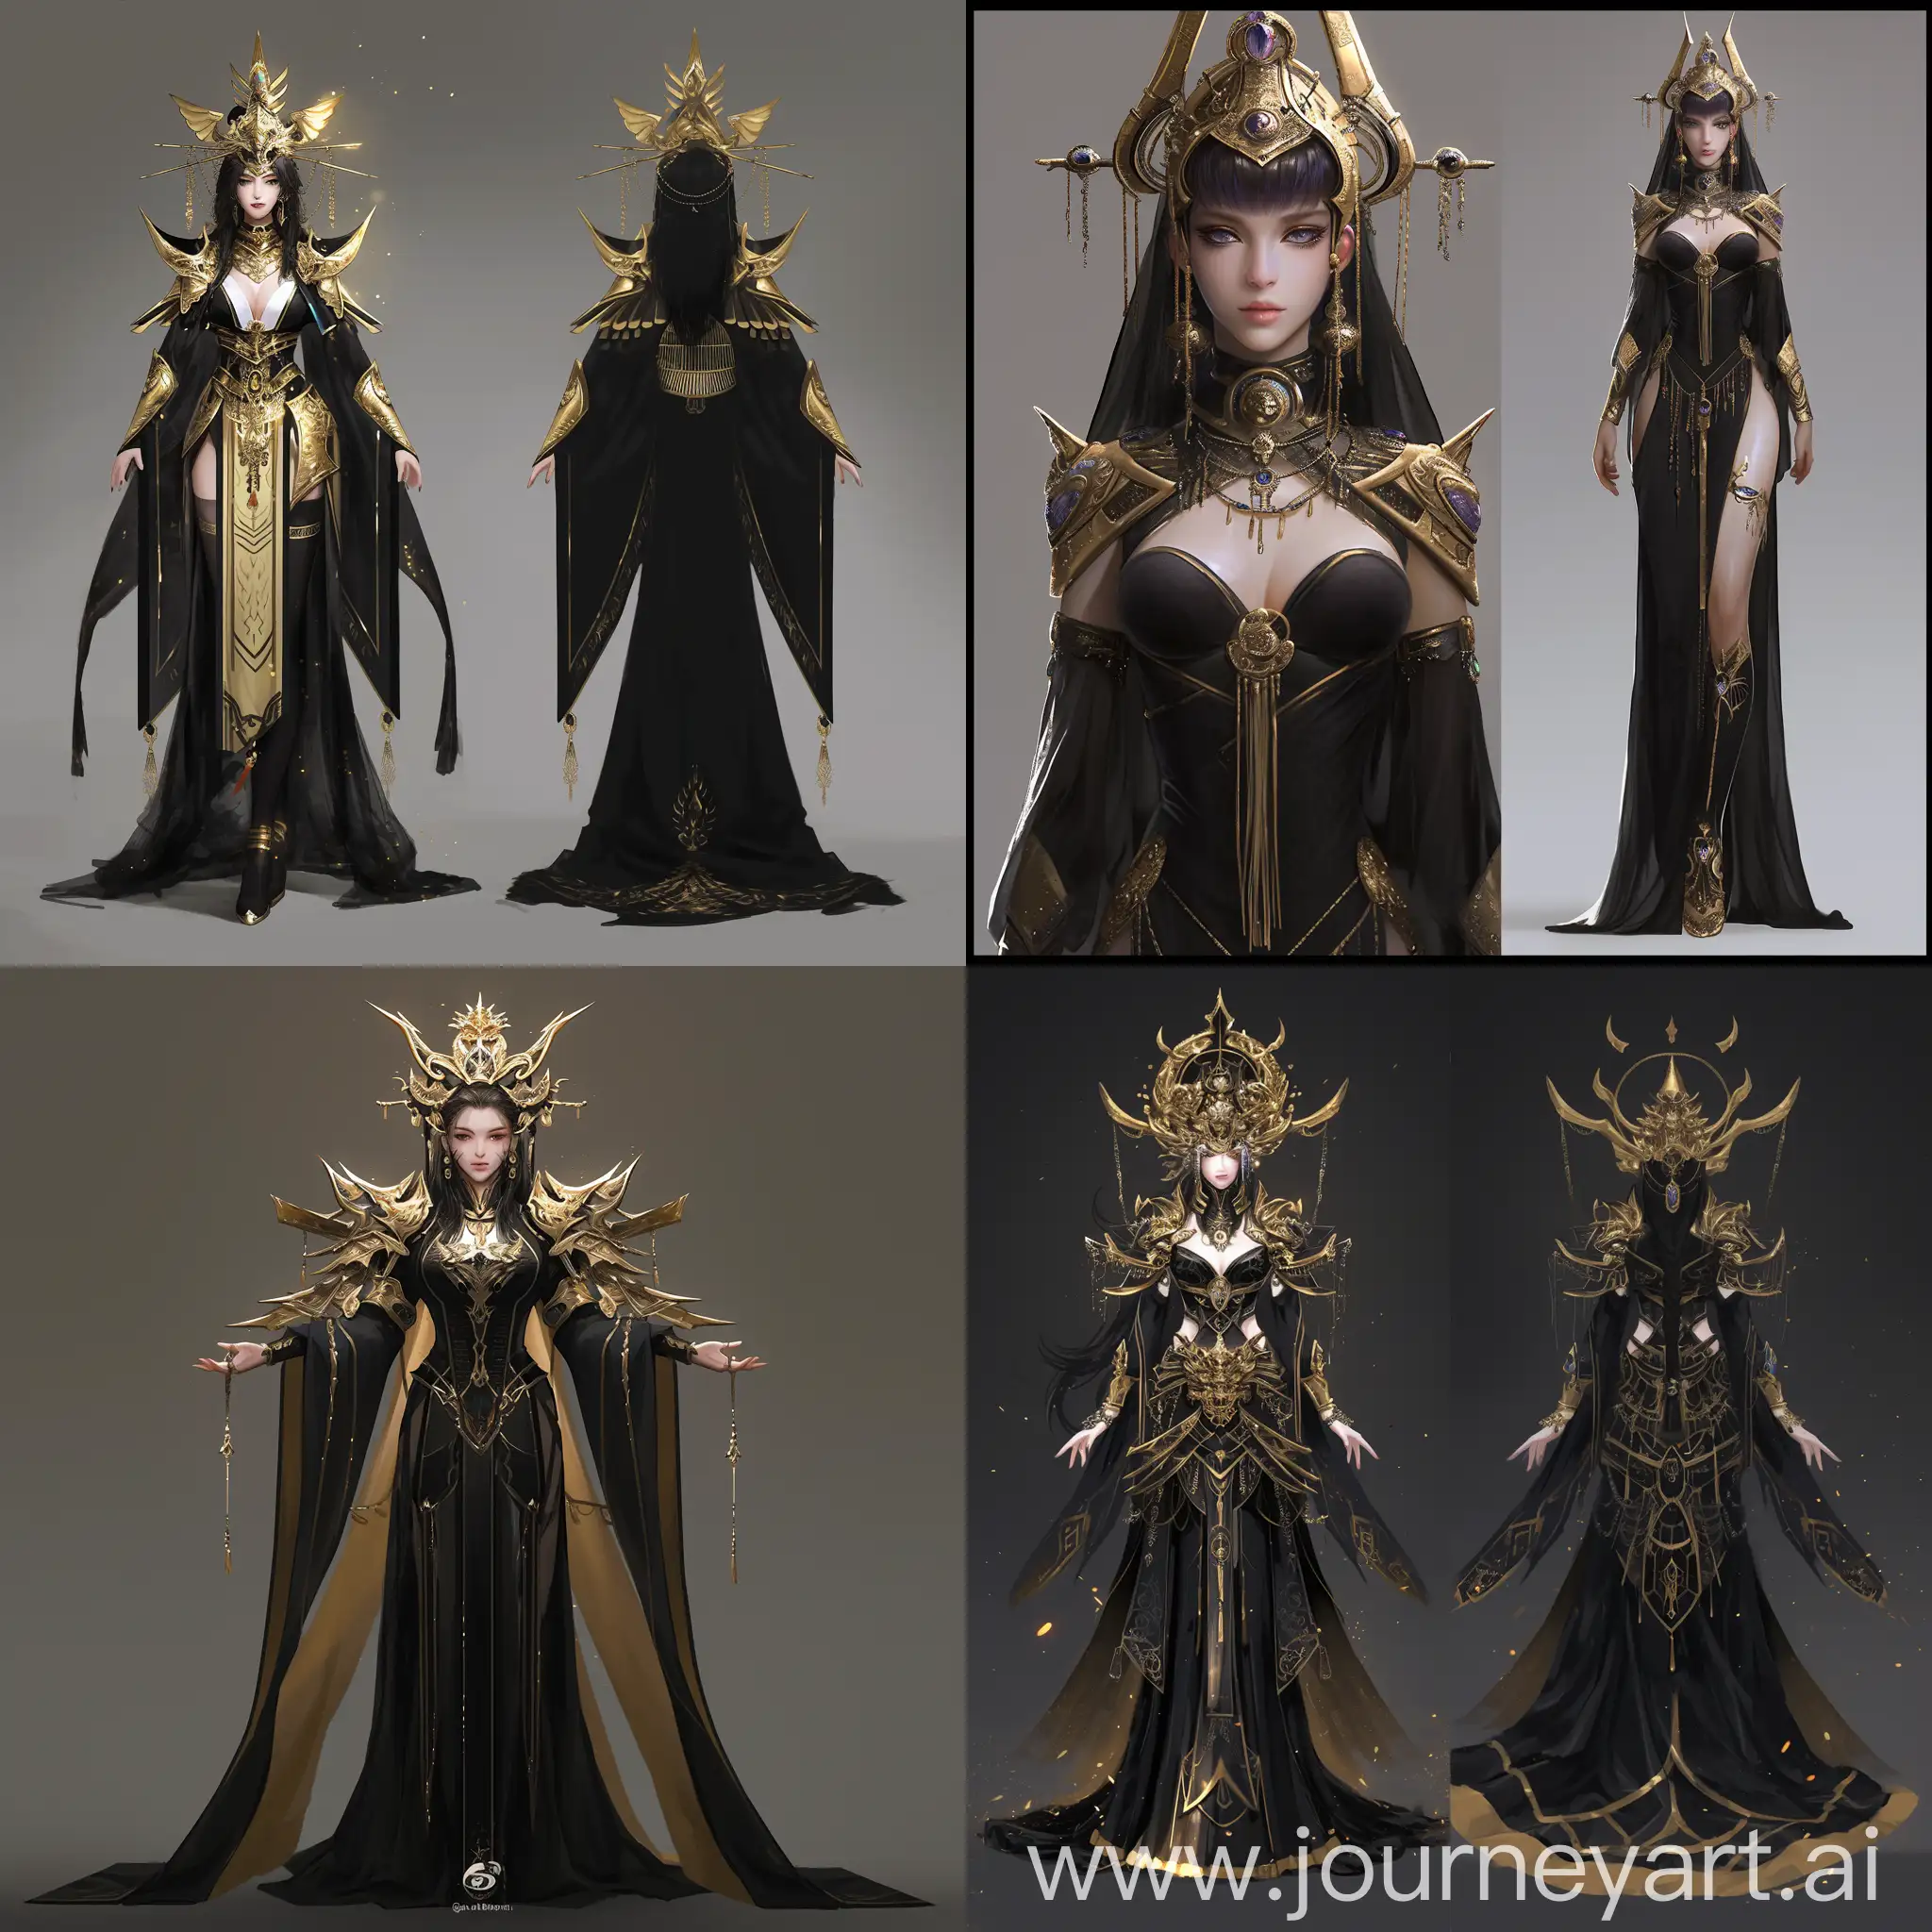 Chinese-Immortal-Cultivating-Scene-with-Egyptian-Goddess-Knight-in-Realistic-CG-Style